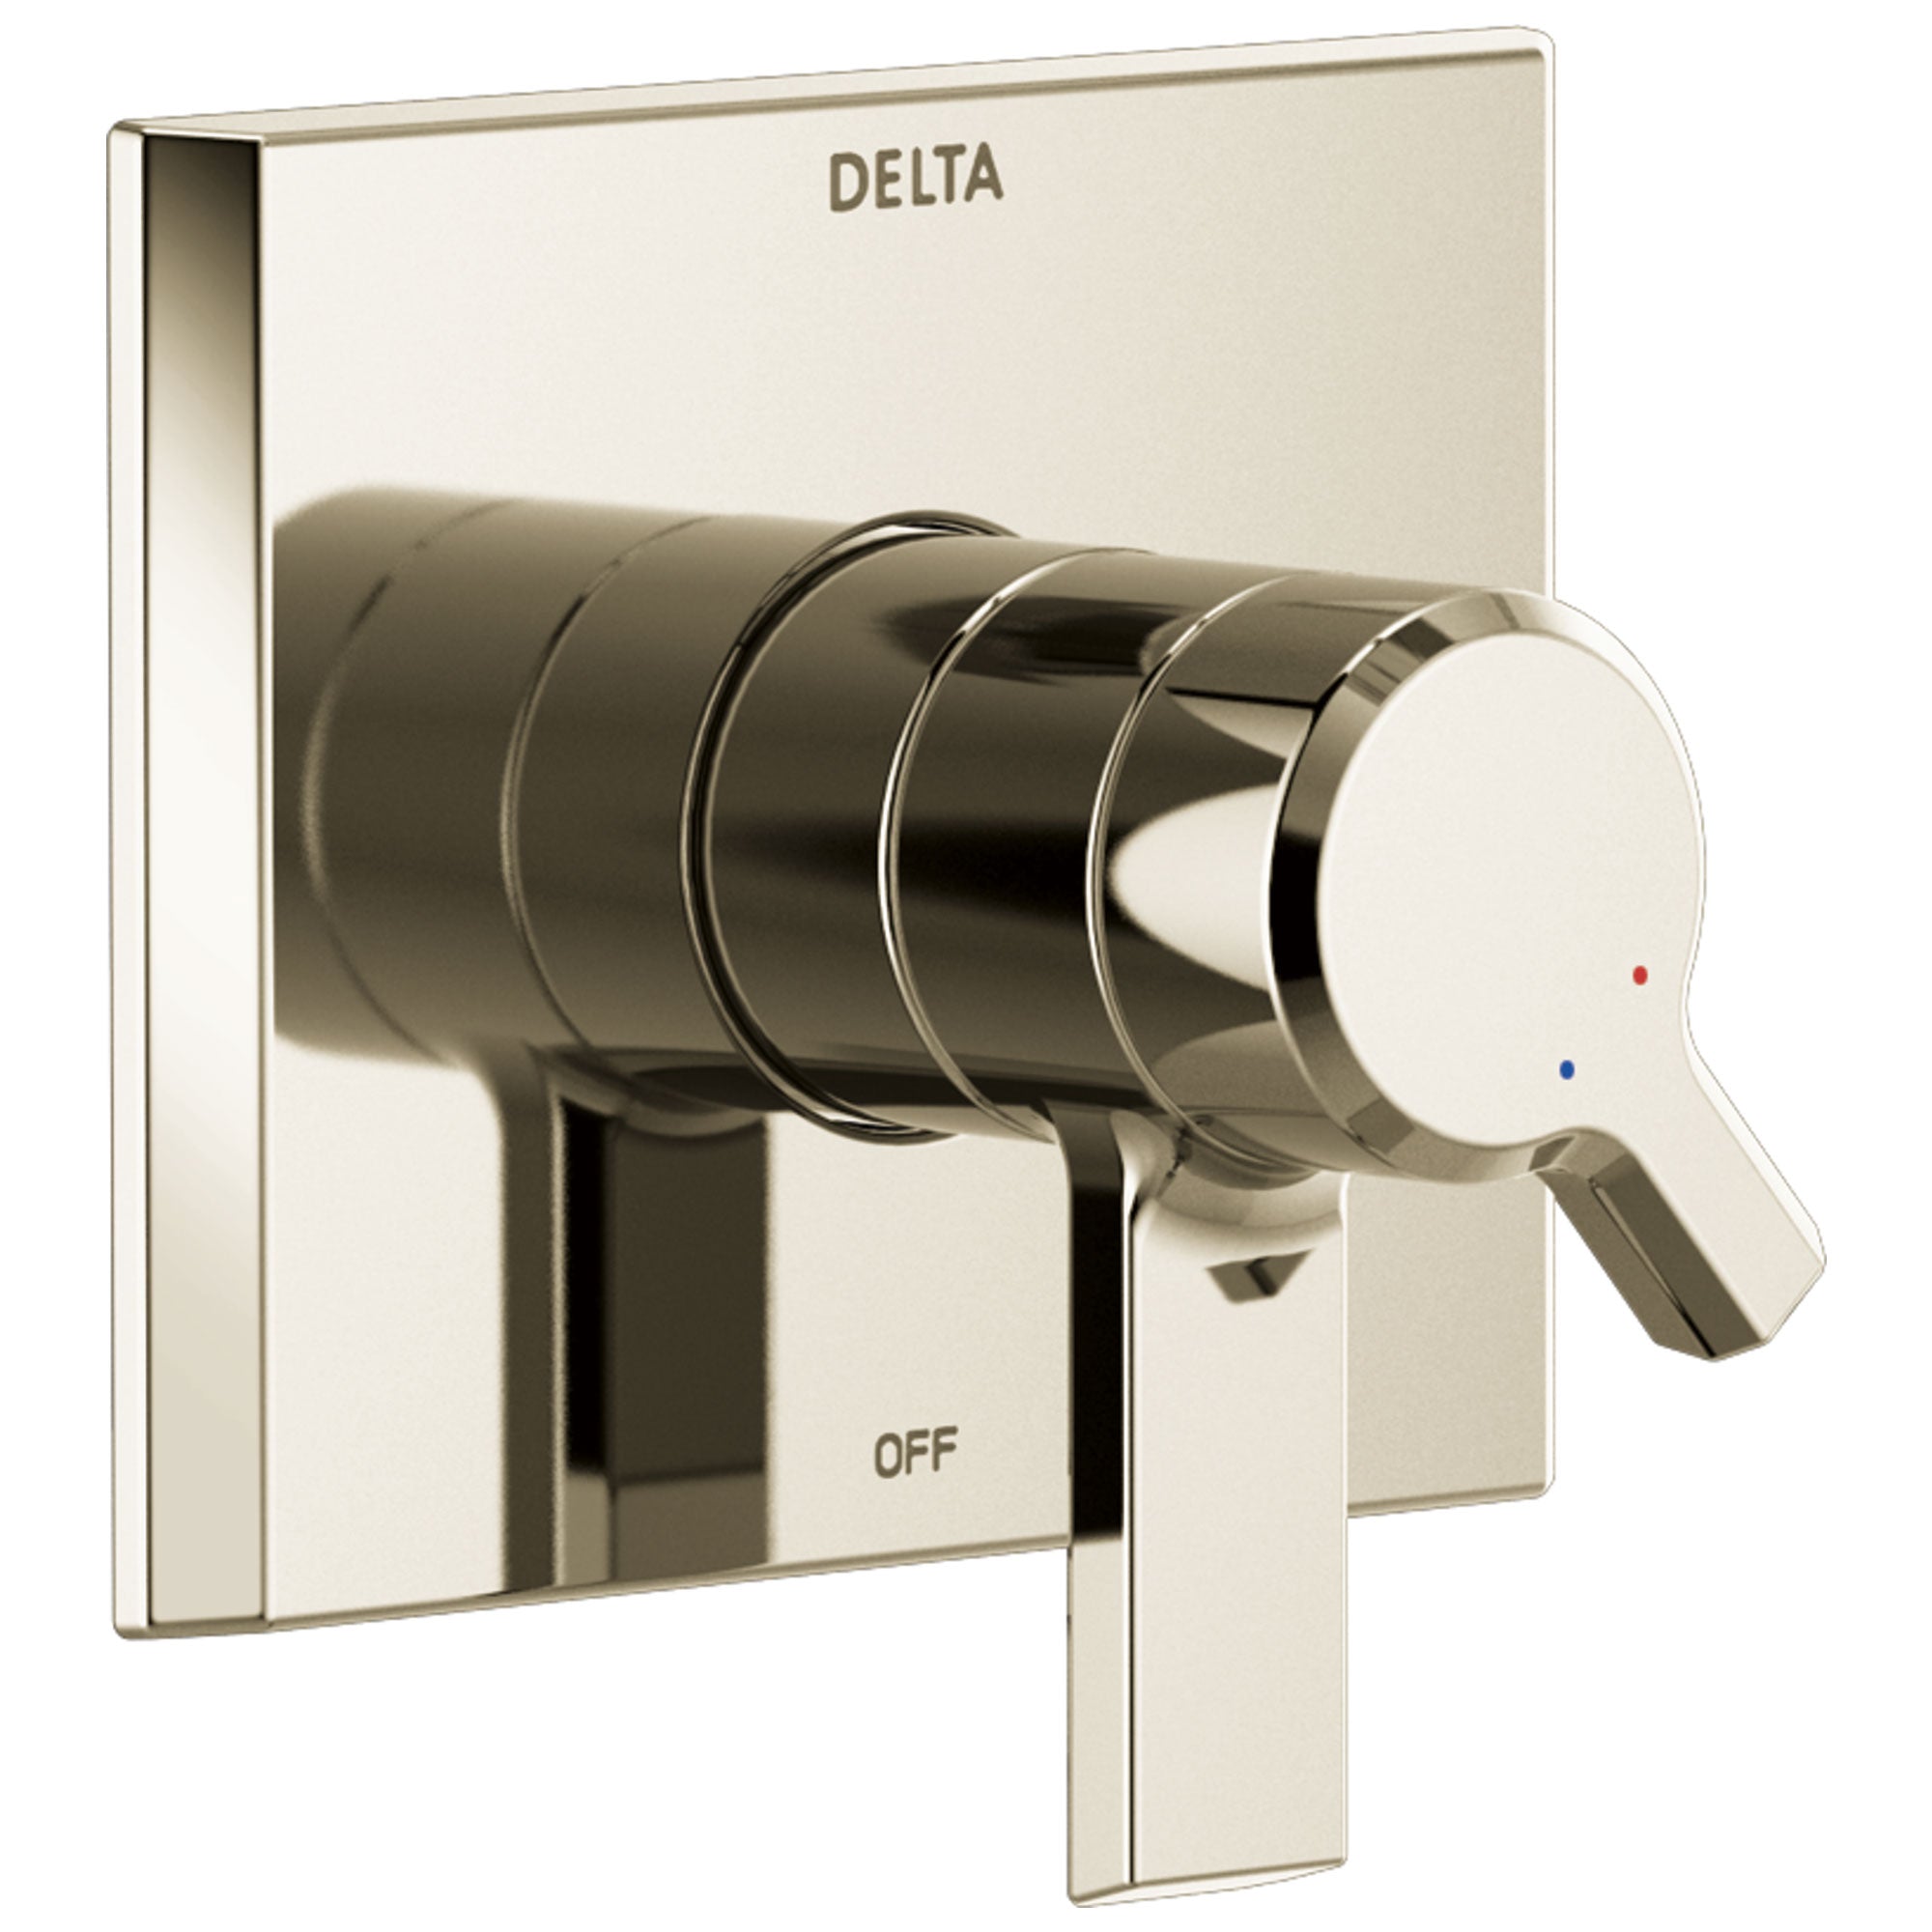 Delta Pivotal Modern Polished Nickel Finish Monitor 17 Series Shower Faucet Control Includes Handles, Cartridge, and Valve without Stops D3393V